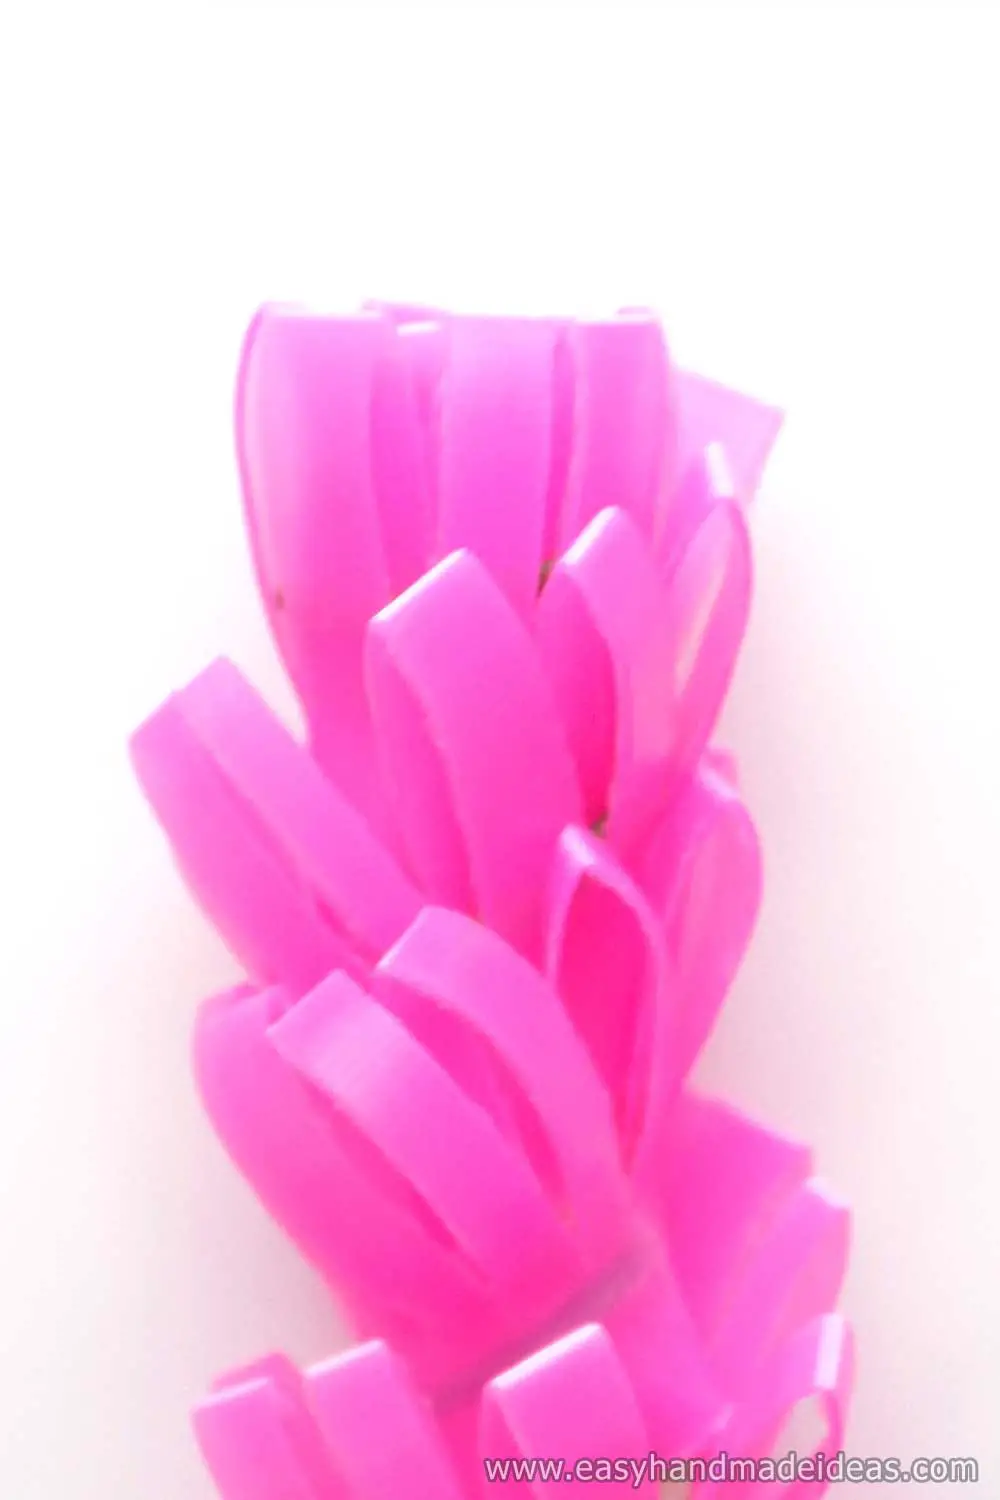 Twisted Pink Straw